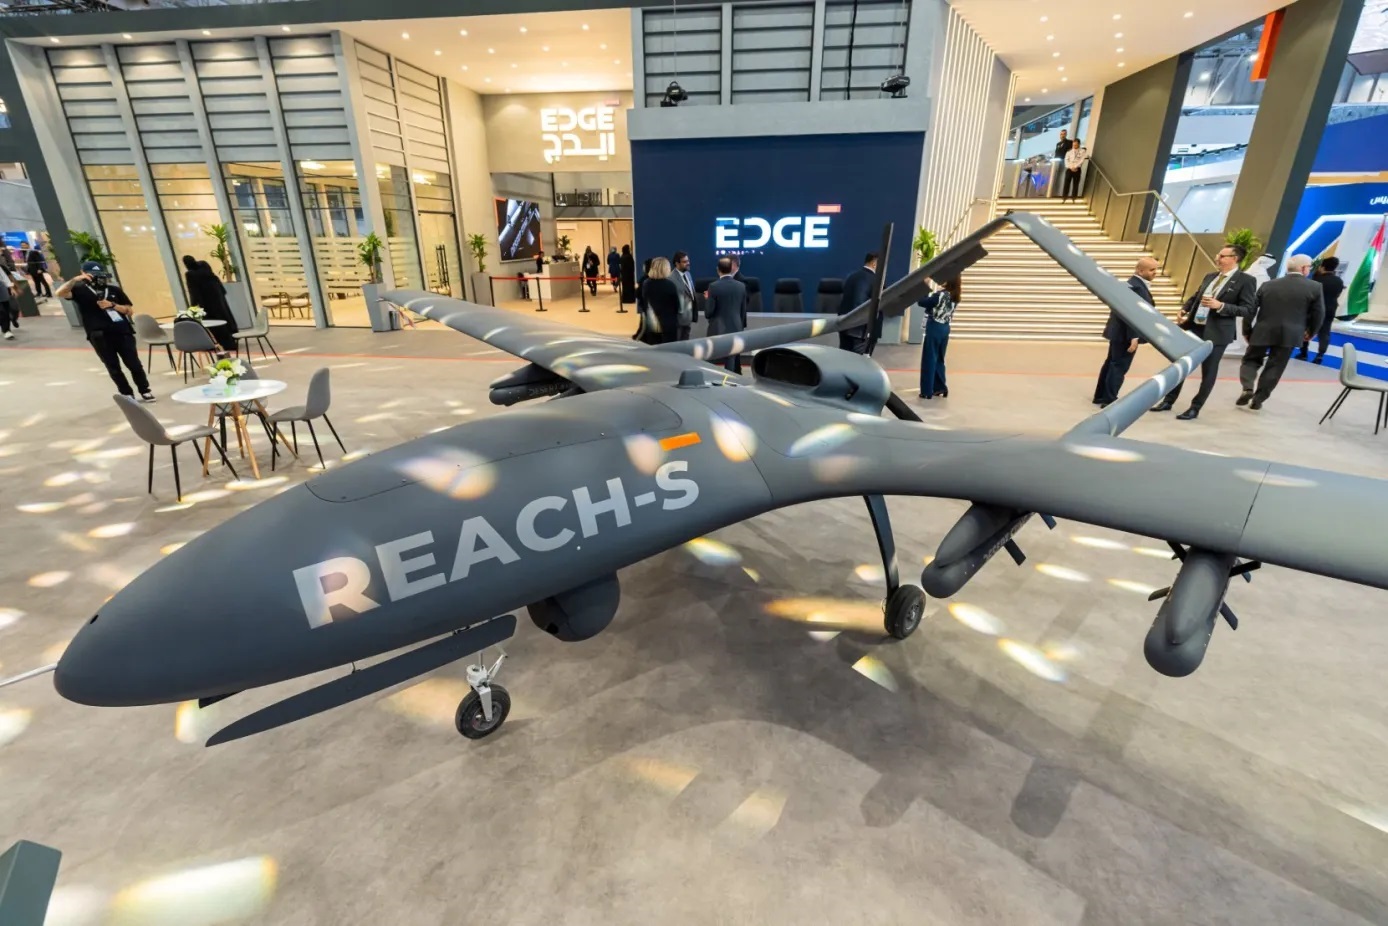 REACH-S fixed-wing unmanned aerial vehicle (UAV)